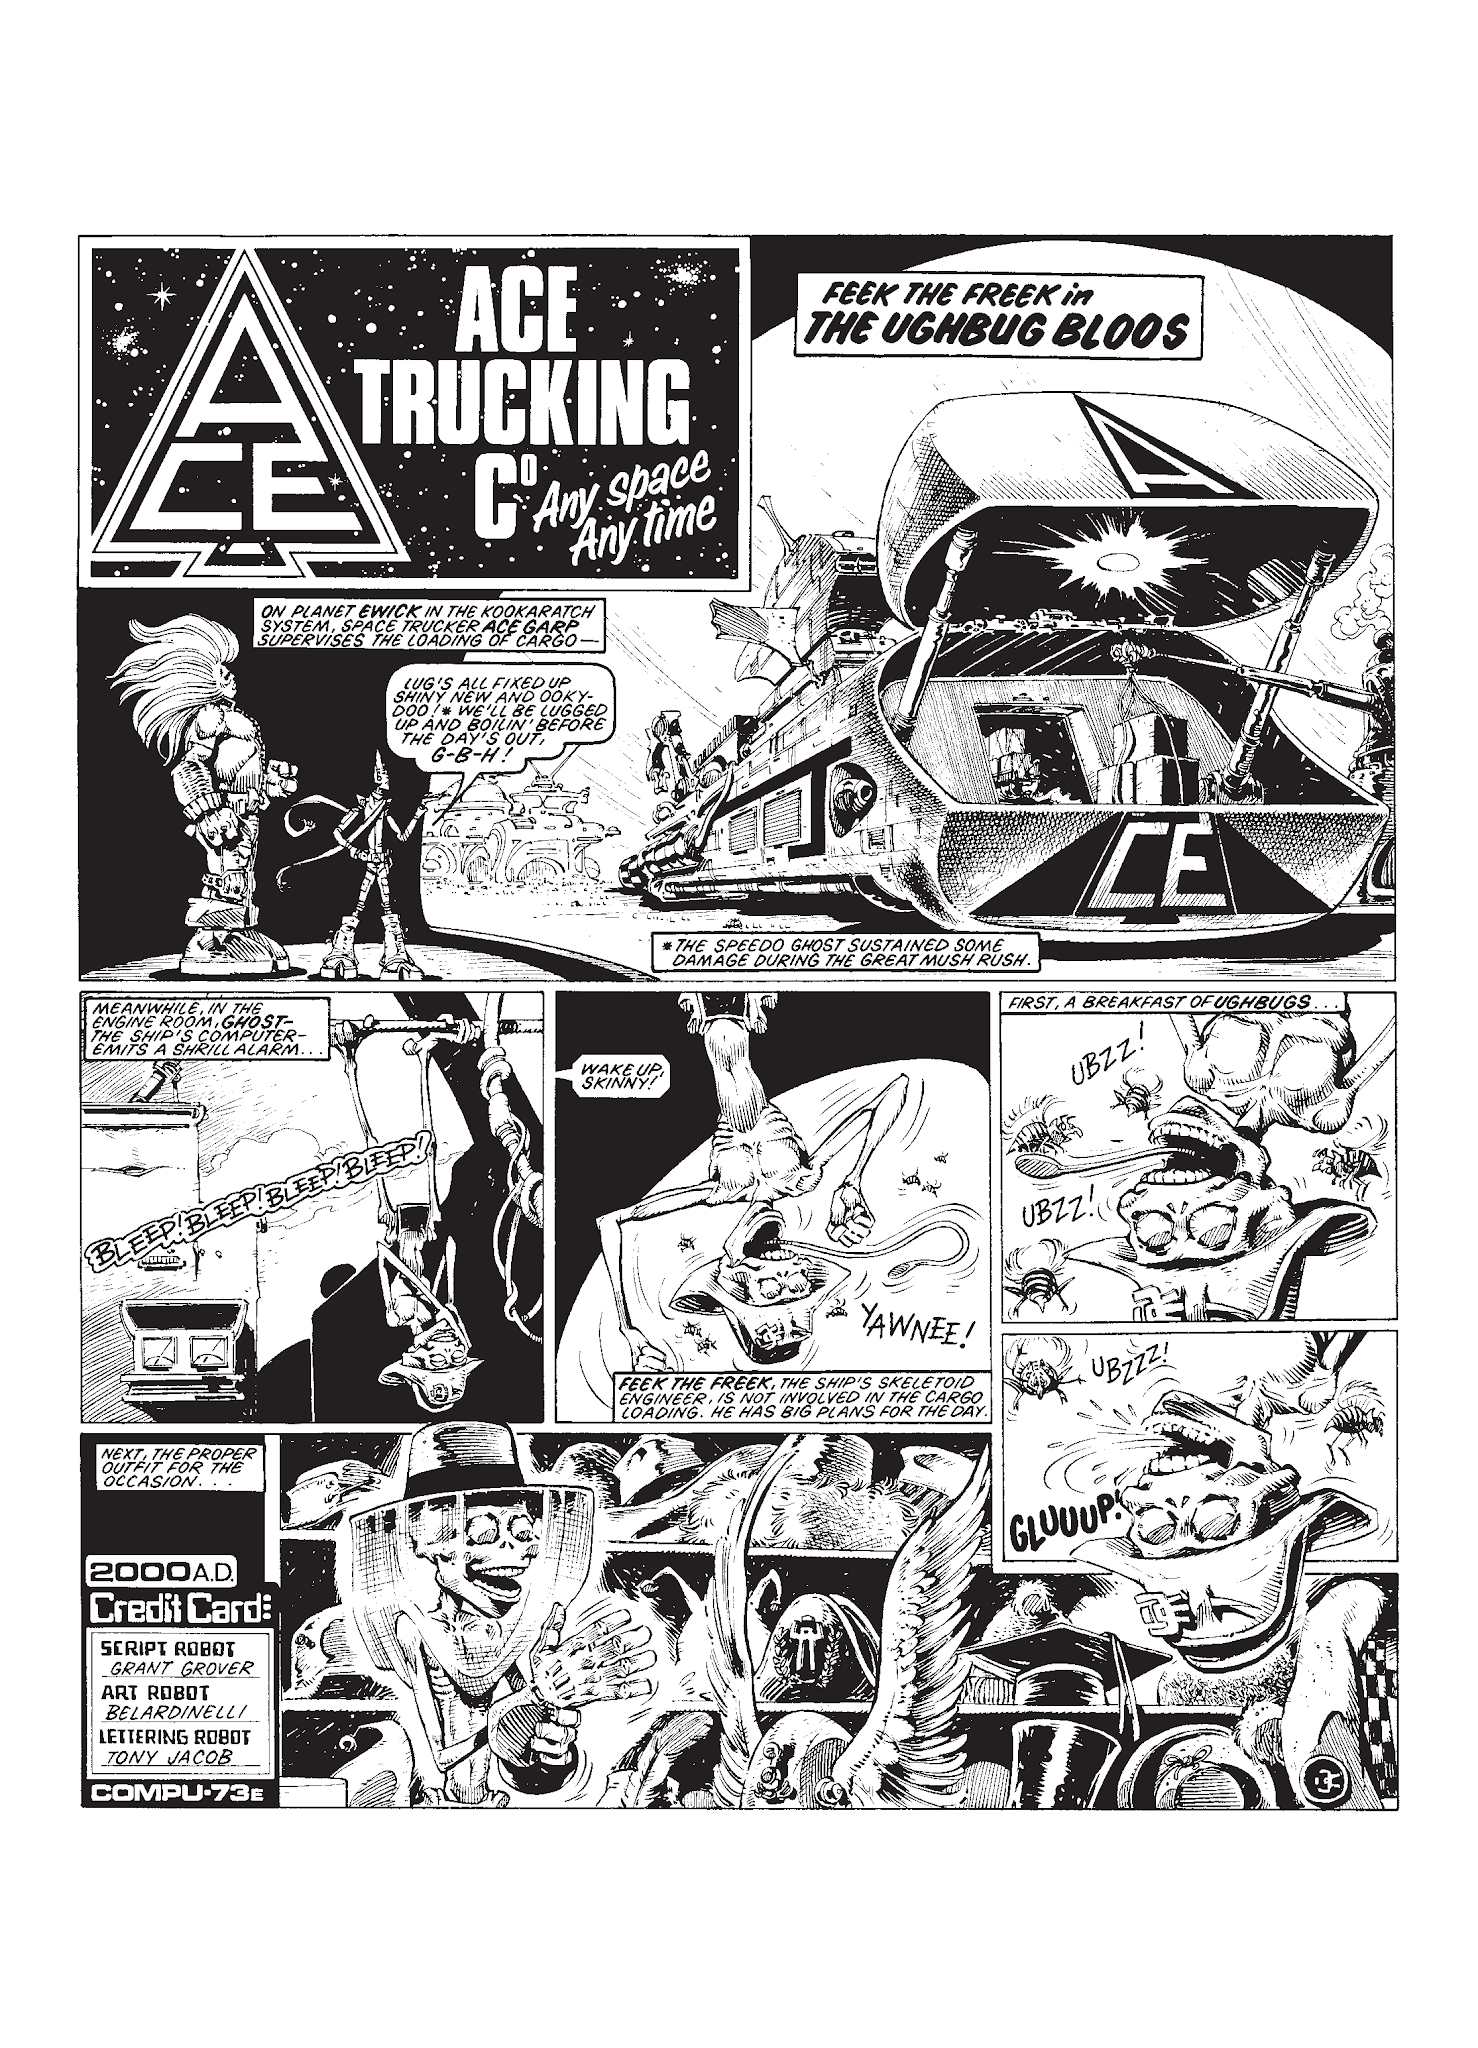 Read online The Complete Ace Trucking Co. comic -  Issue # TPB 1 - 127